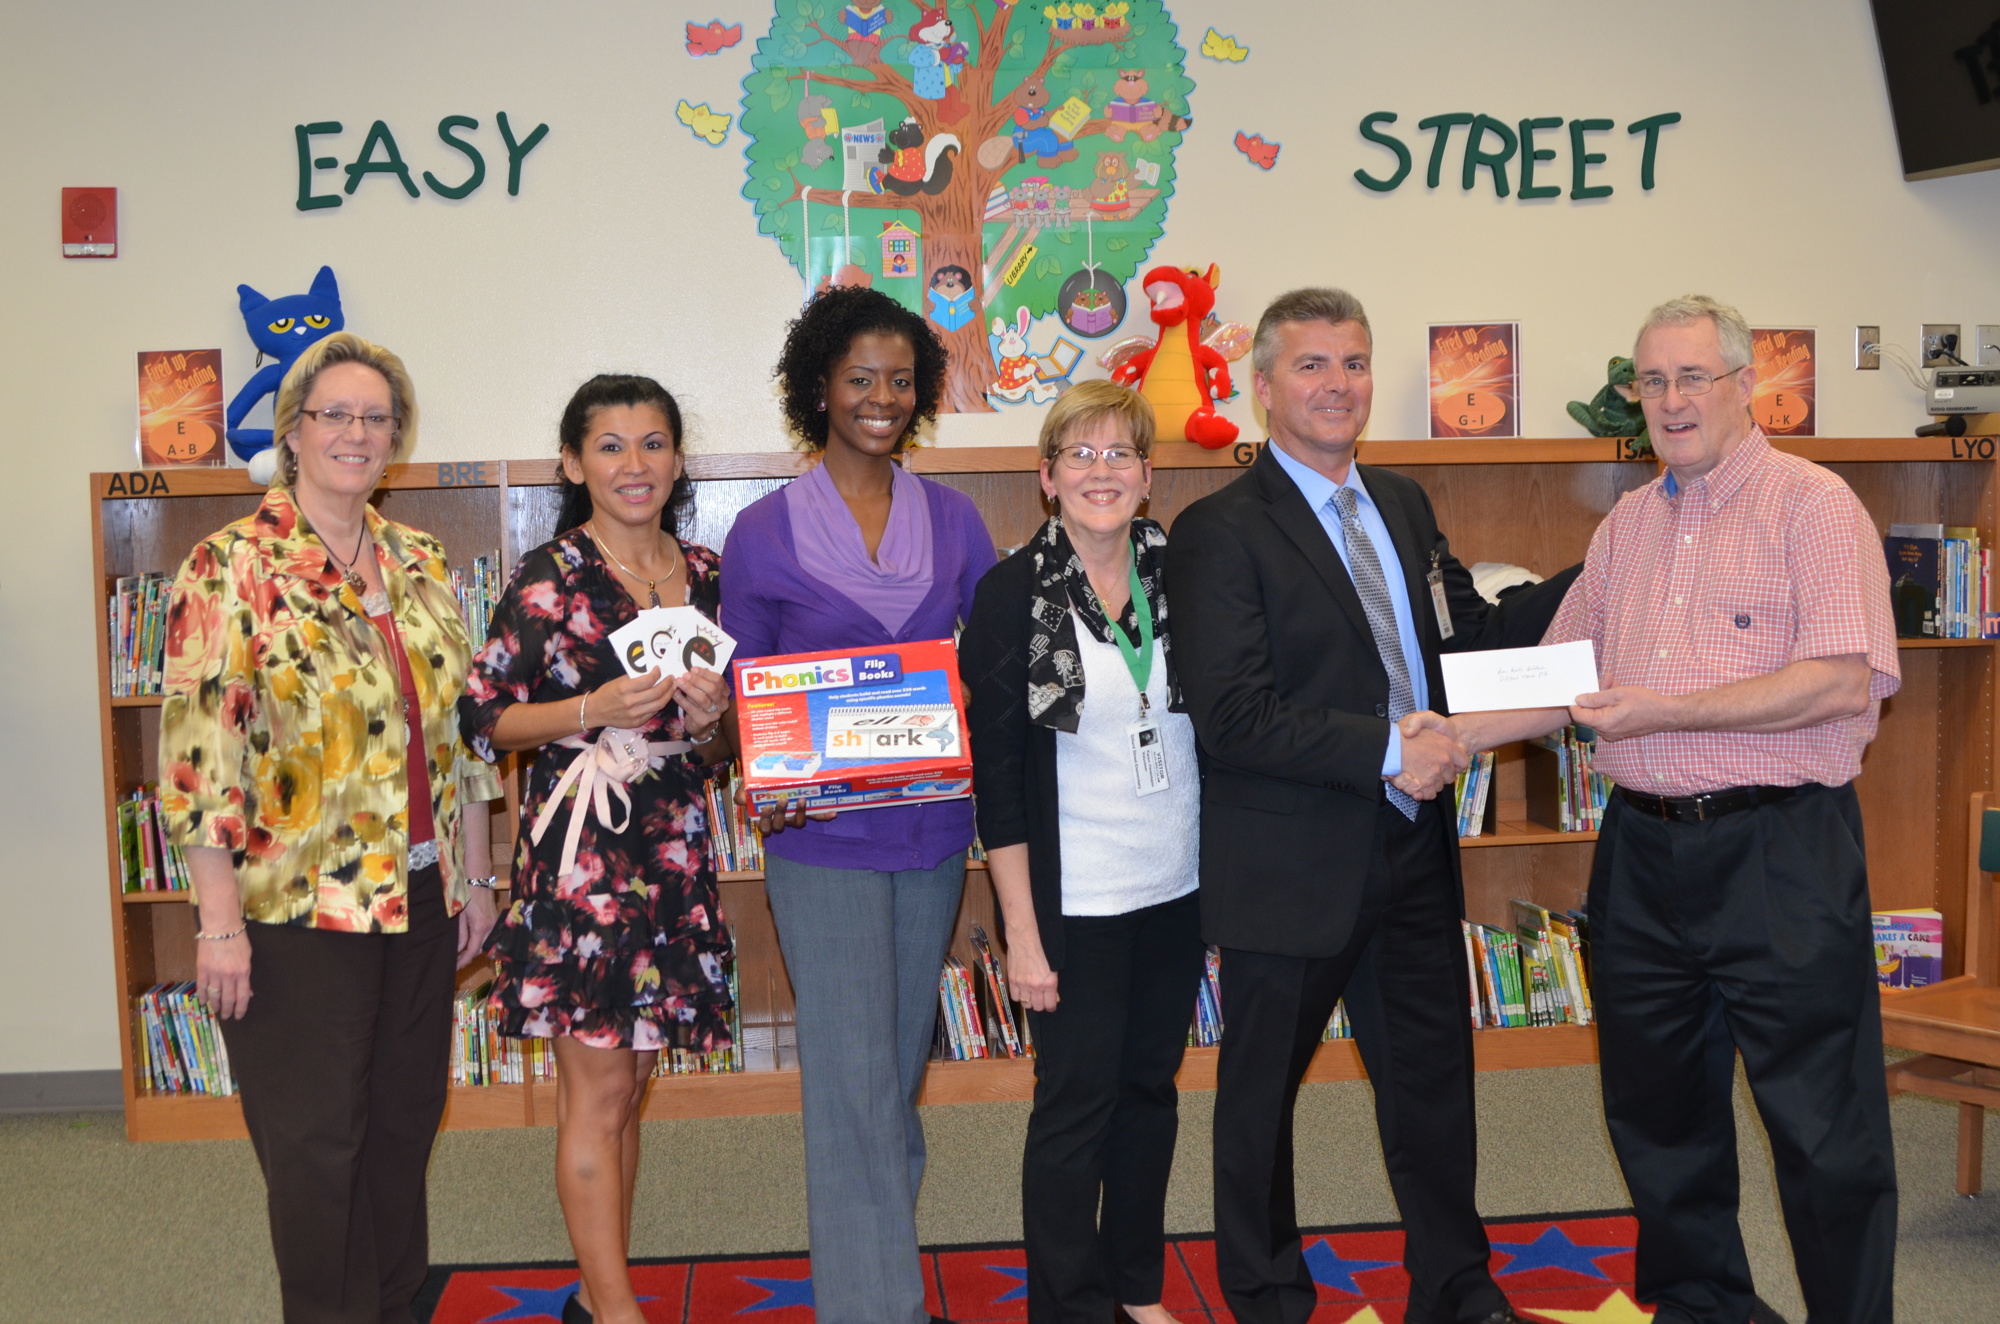 Mindi Smith, executive area director of the West Learning Community; Daisy Mitchell; Dillard Street music teacher Kelley Bell; Karen Hausmann; DSES Assistant Principal Carl Sousa; and Pastor Rusty Belcher of First United Methodist Church of Winter Garden.